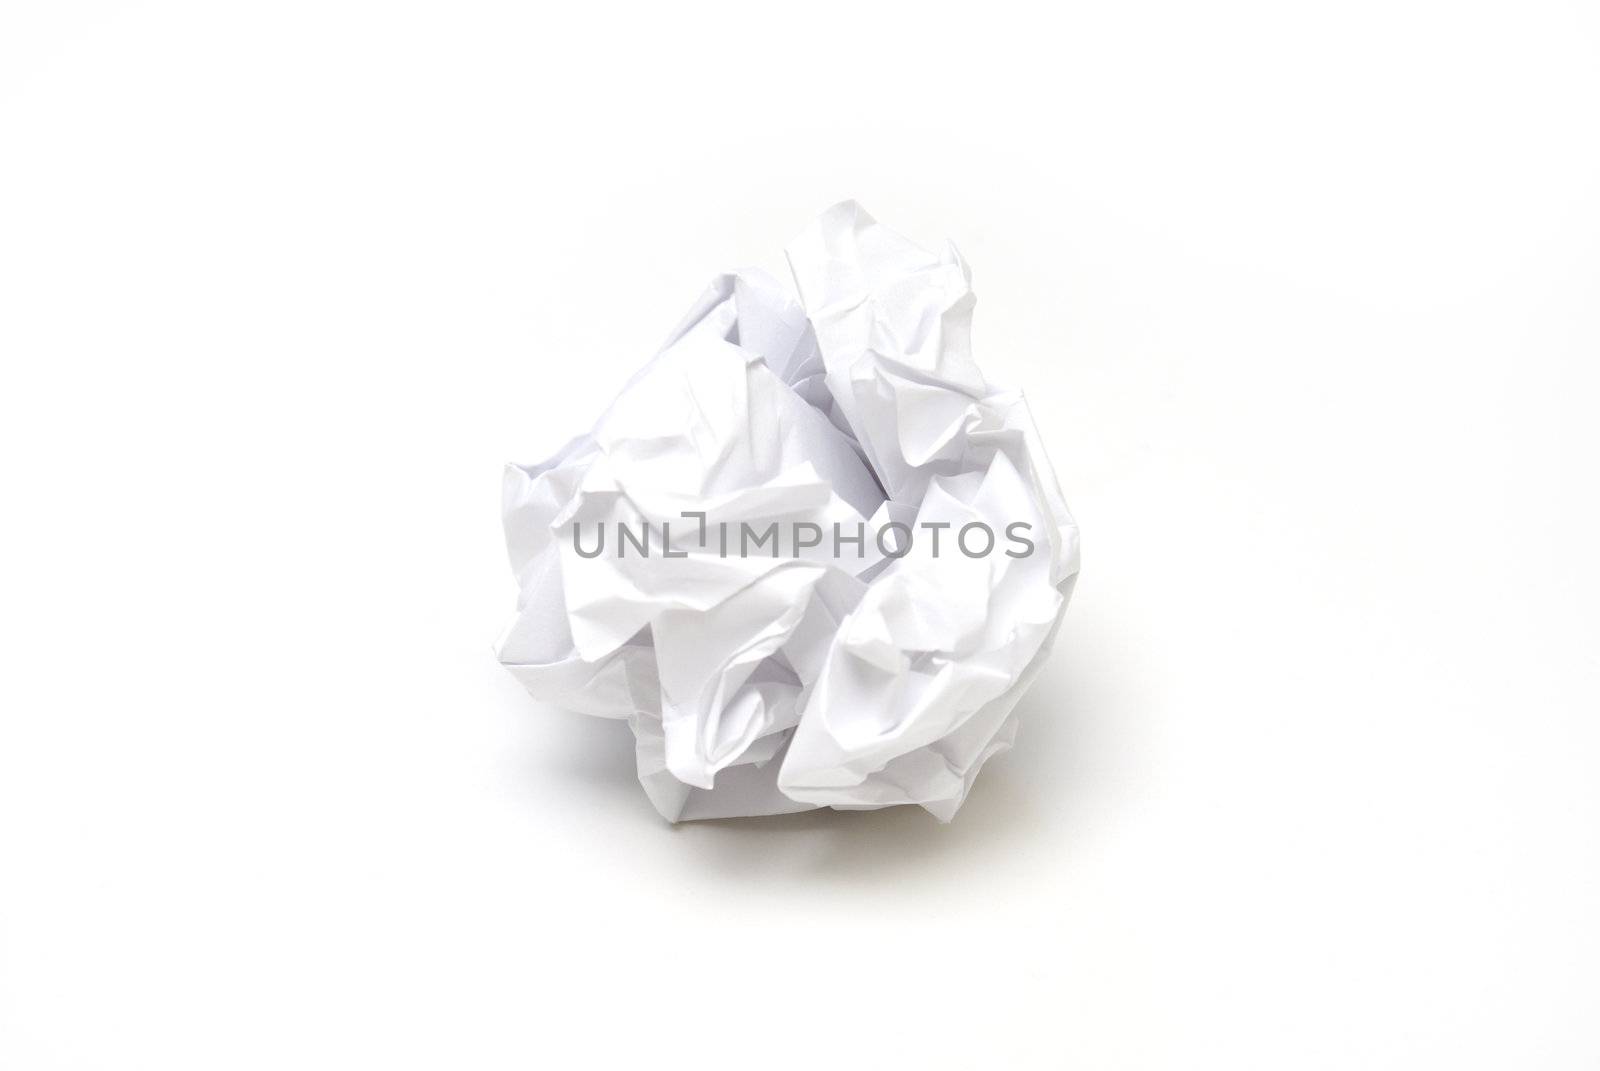 A piece of crumpled paper in the form of a ball.